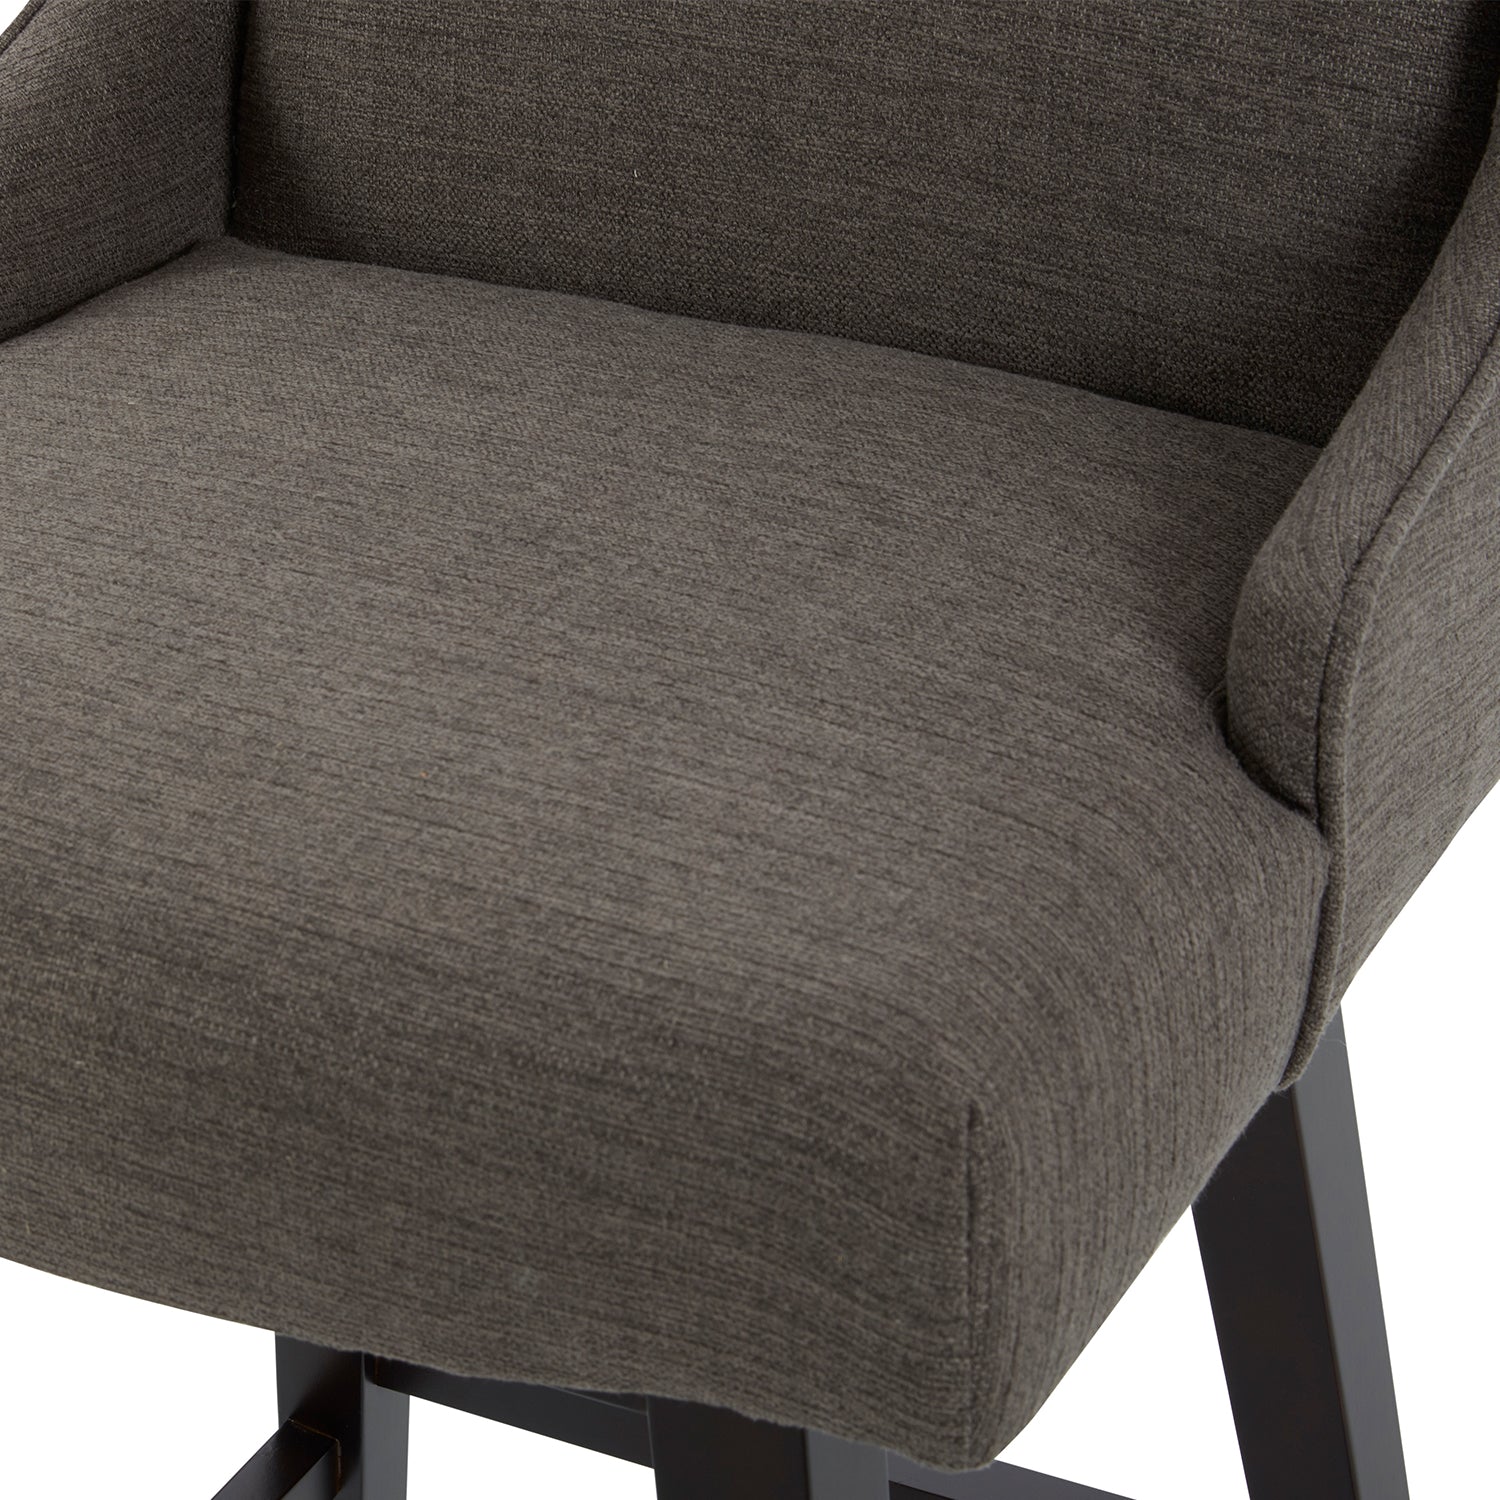 CHITA LIVING-Ryker Transitional Swivel Counter Stool - Fabric & Leather-Counter Stools-Performance Fabric-Charcoal-1 Pack